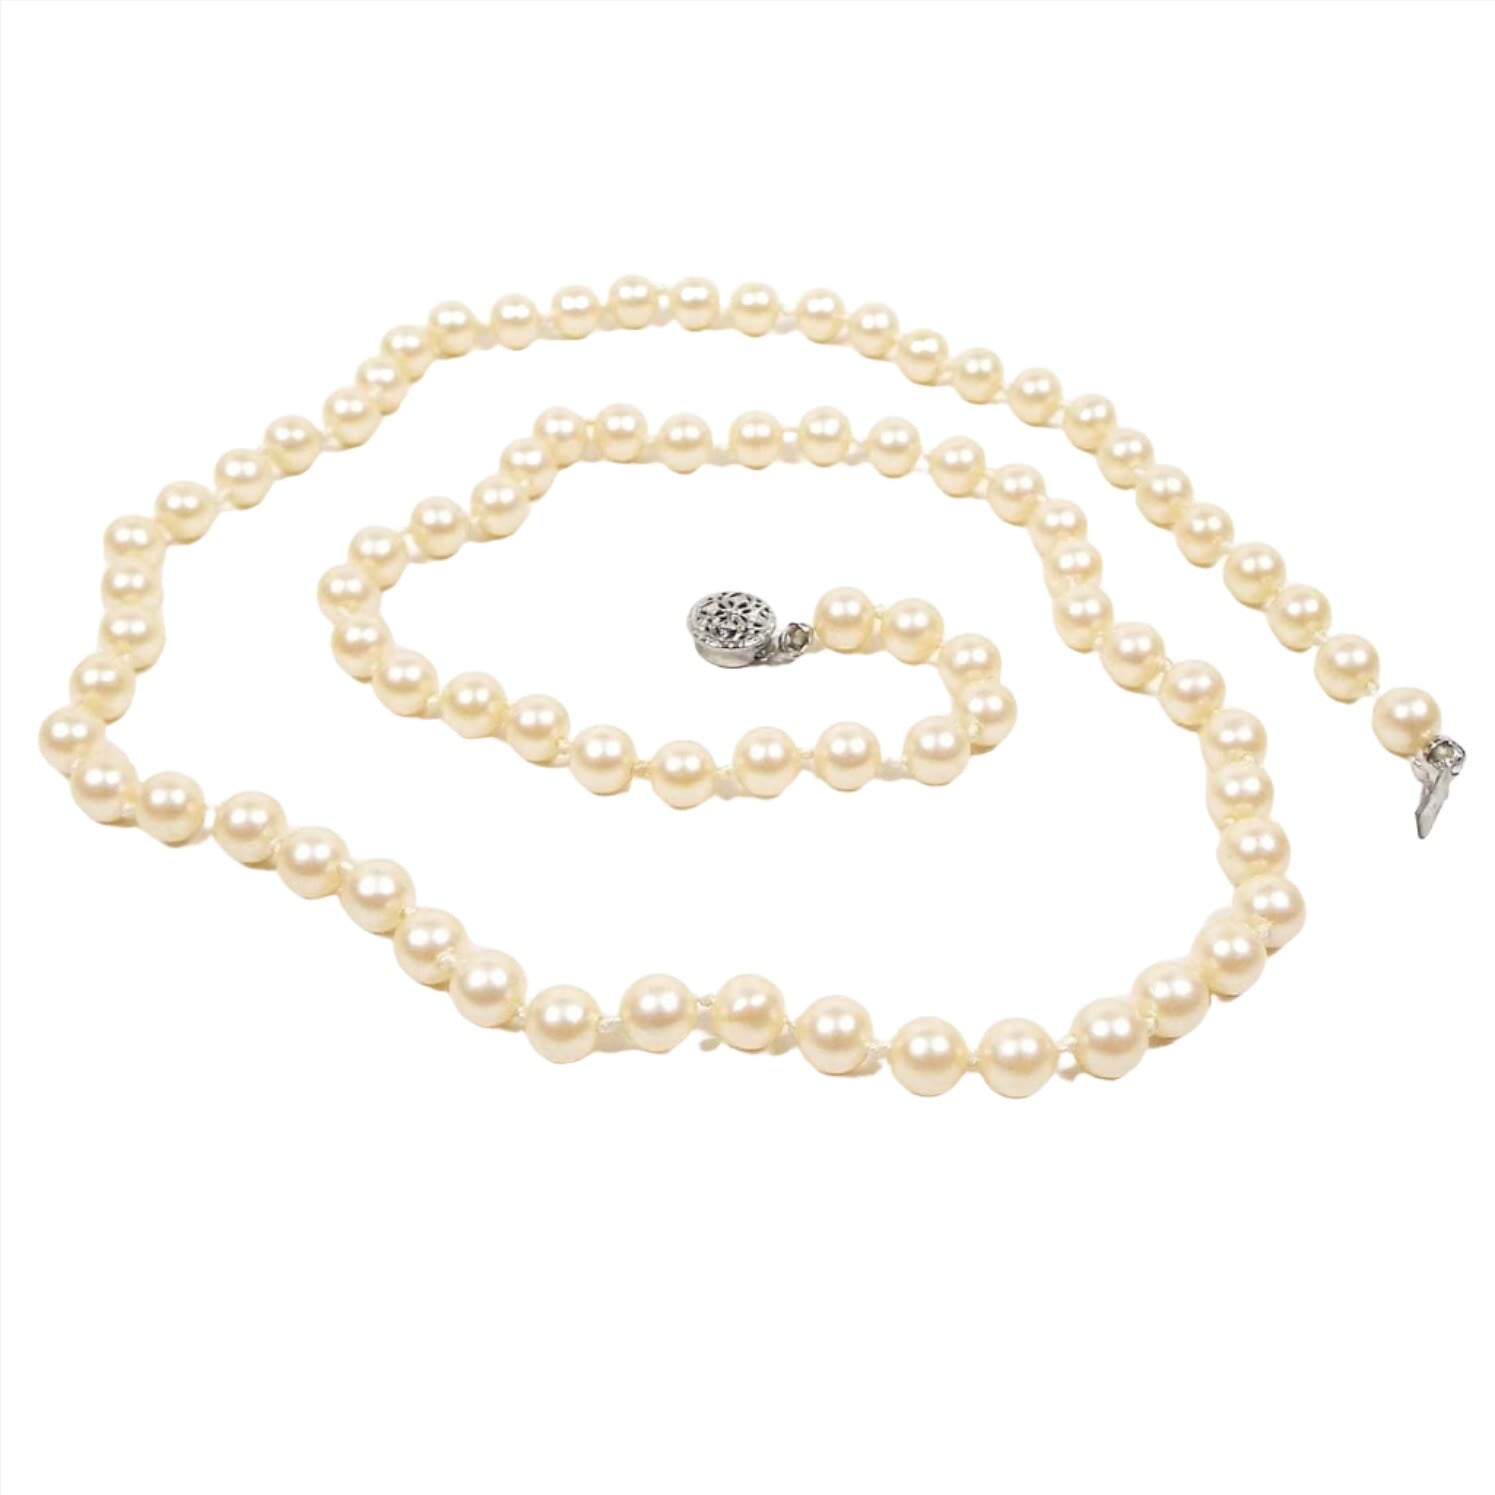 Vintage Faux Pearl Necklace with Box Clasp - Sharky's Waters